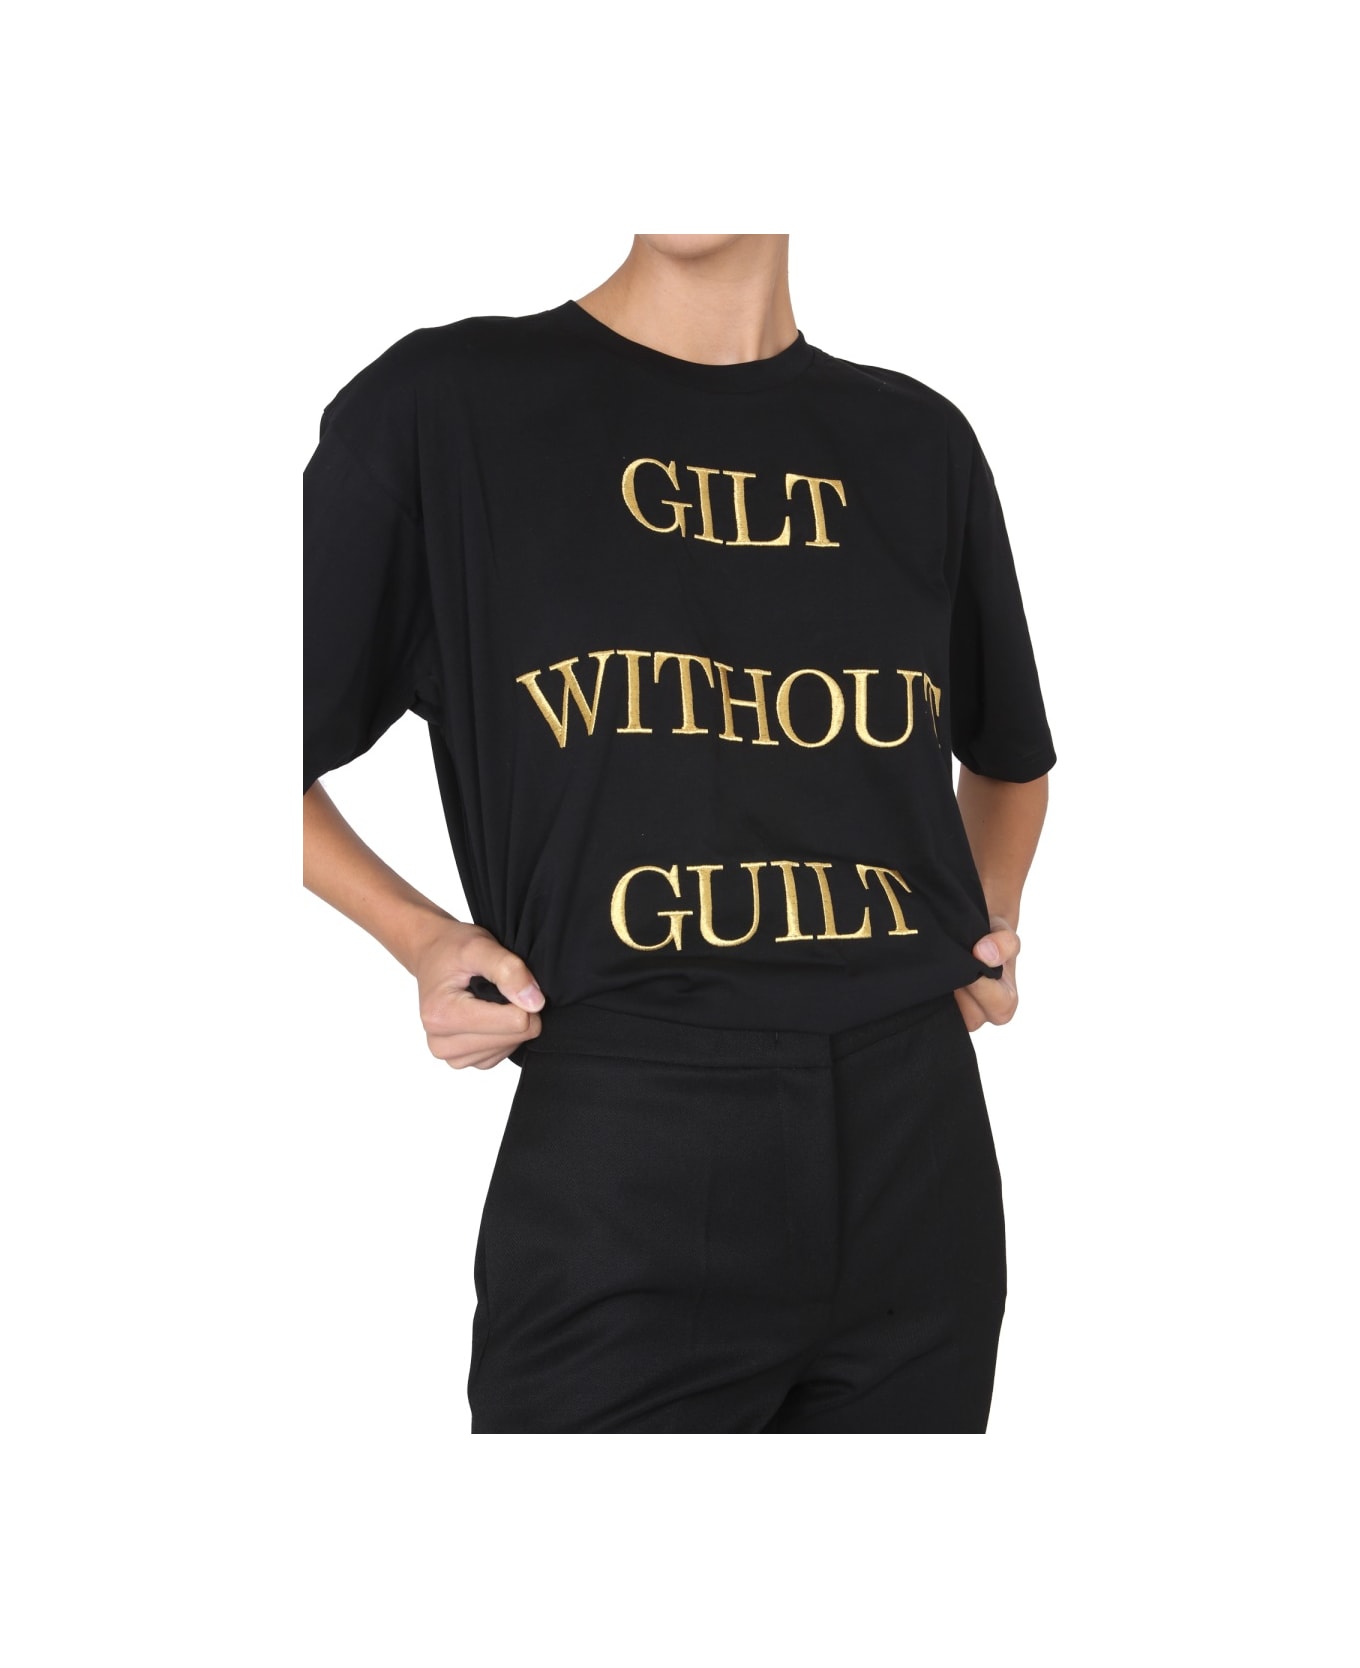 Moschino "guilt Without Guilt" T-shirt - BLACK